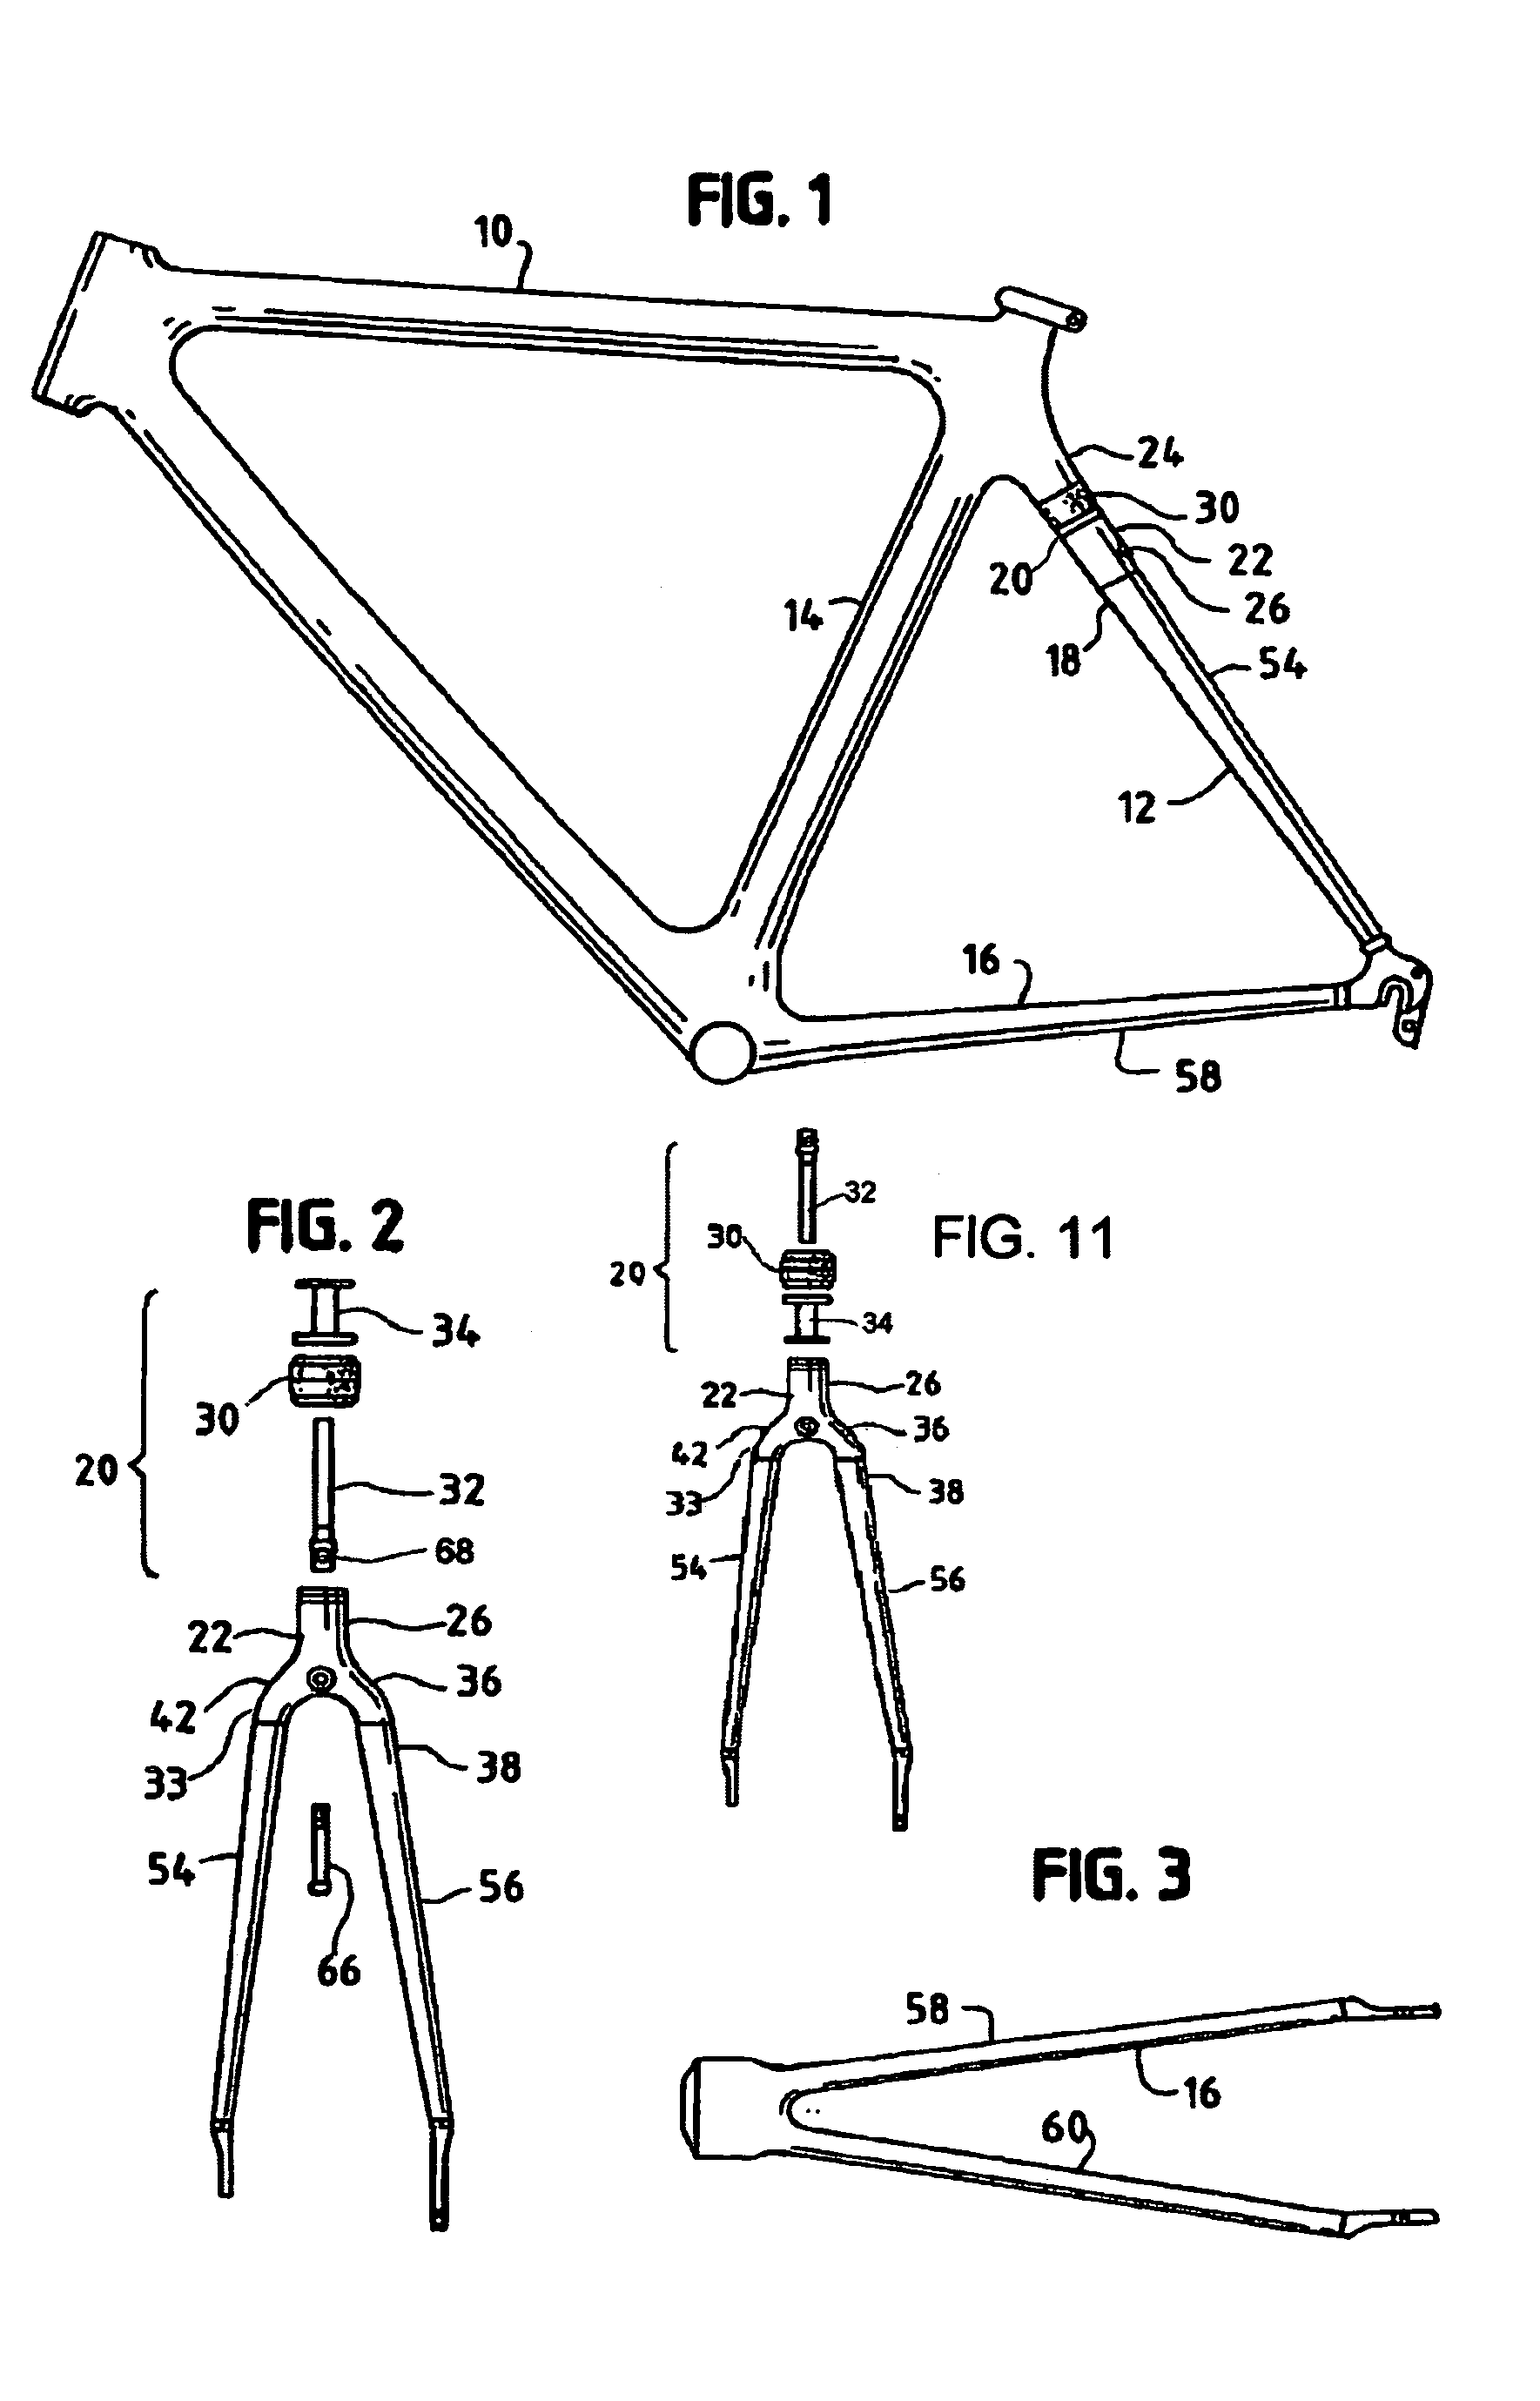 Ultra lightweight, high efficiency bicycle suspension